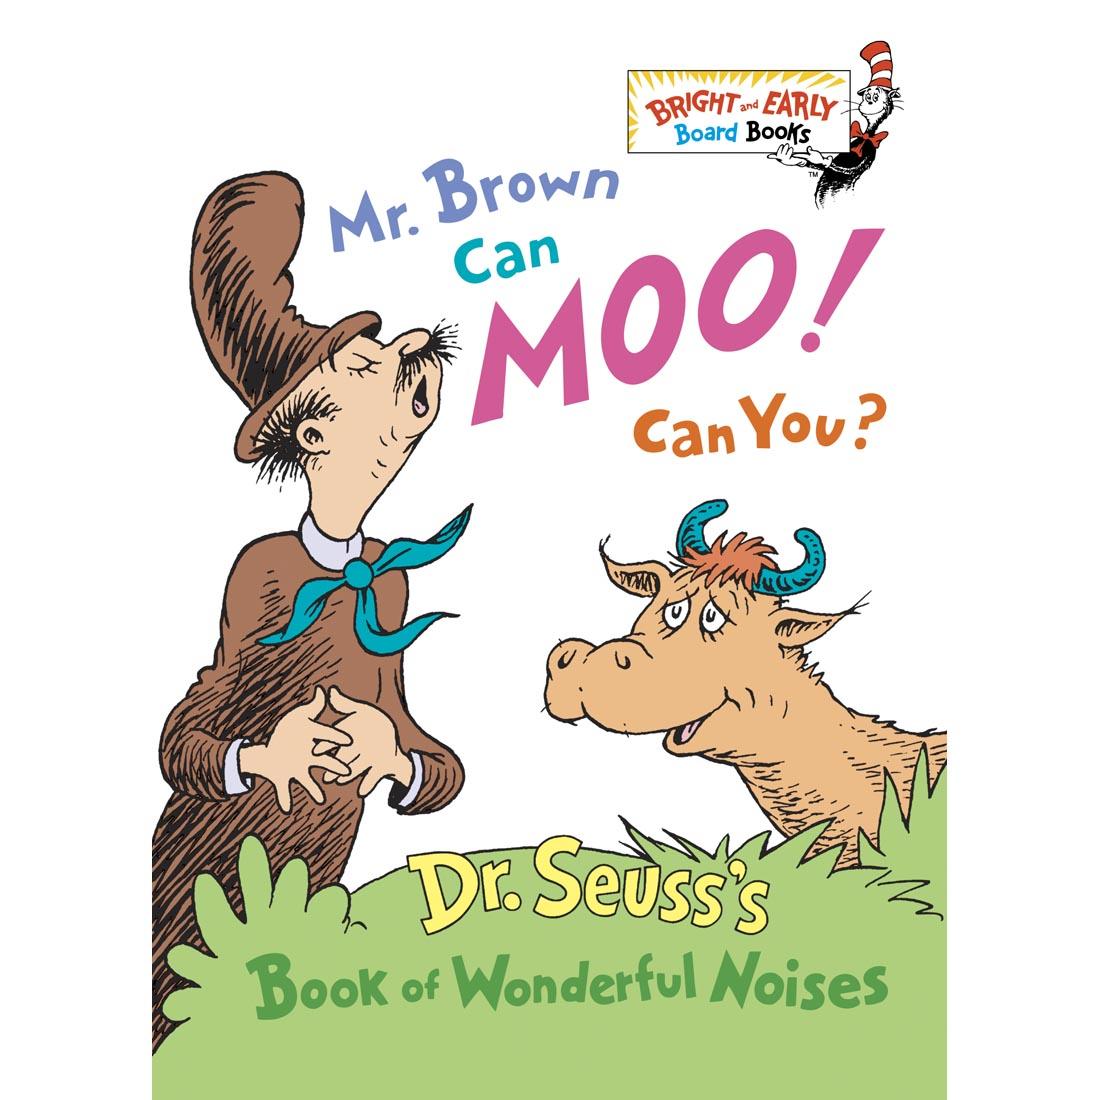 Dr. Seuss's Book Of Wonderful Noises: Mr. Brown Can Moo! Can You? Board Book